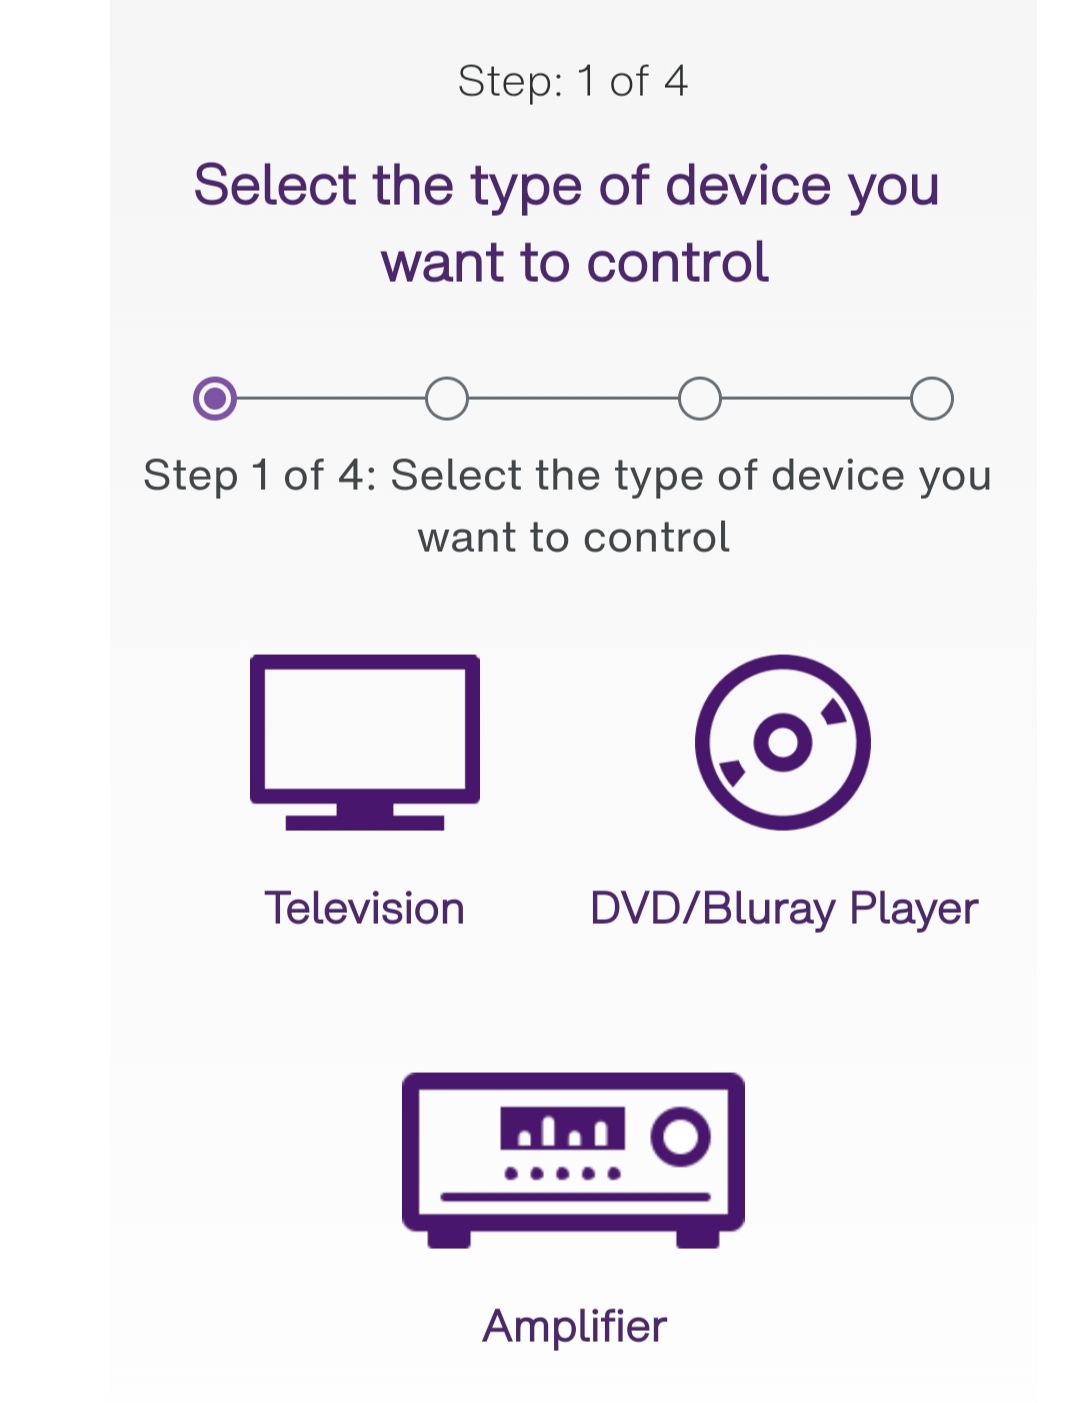 Choose the device (TV/ DVD/ Bluray/ Amplifier).